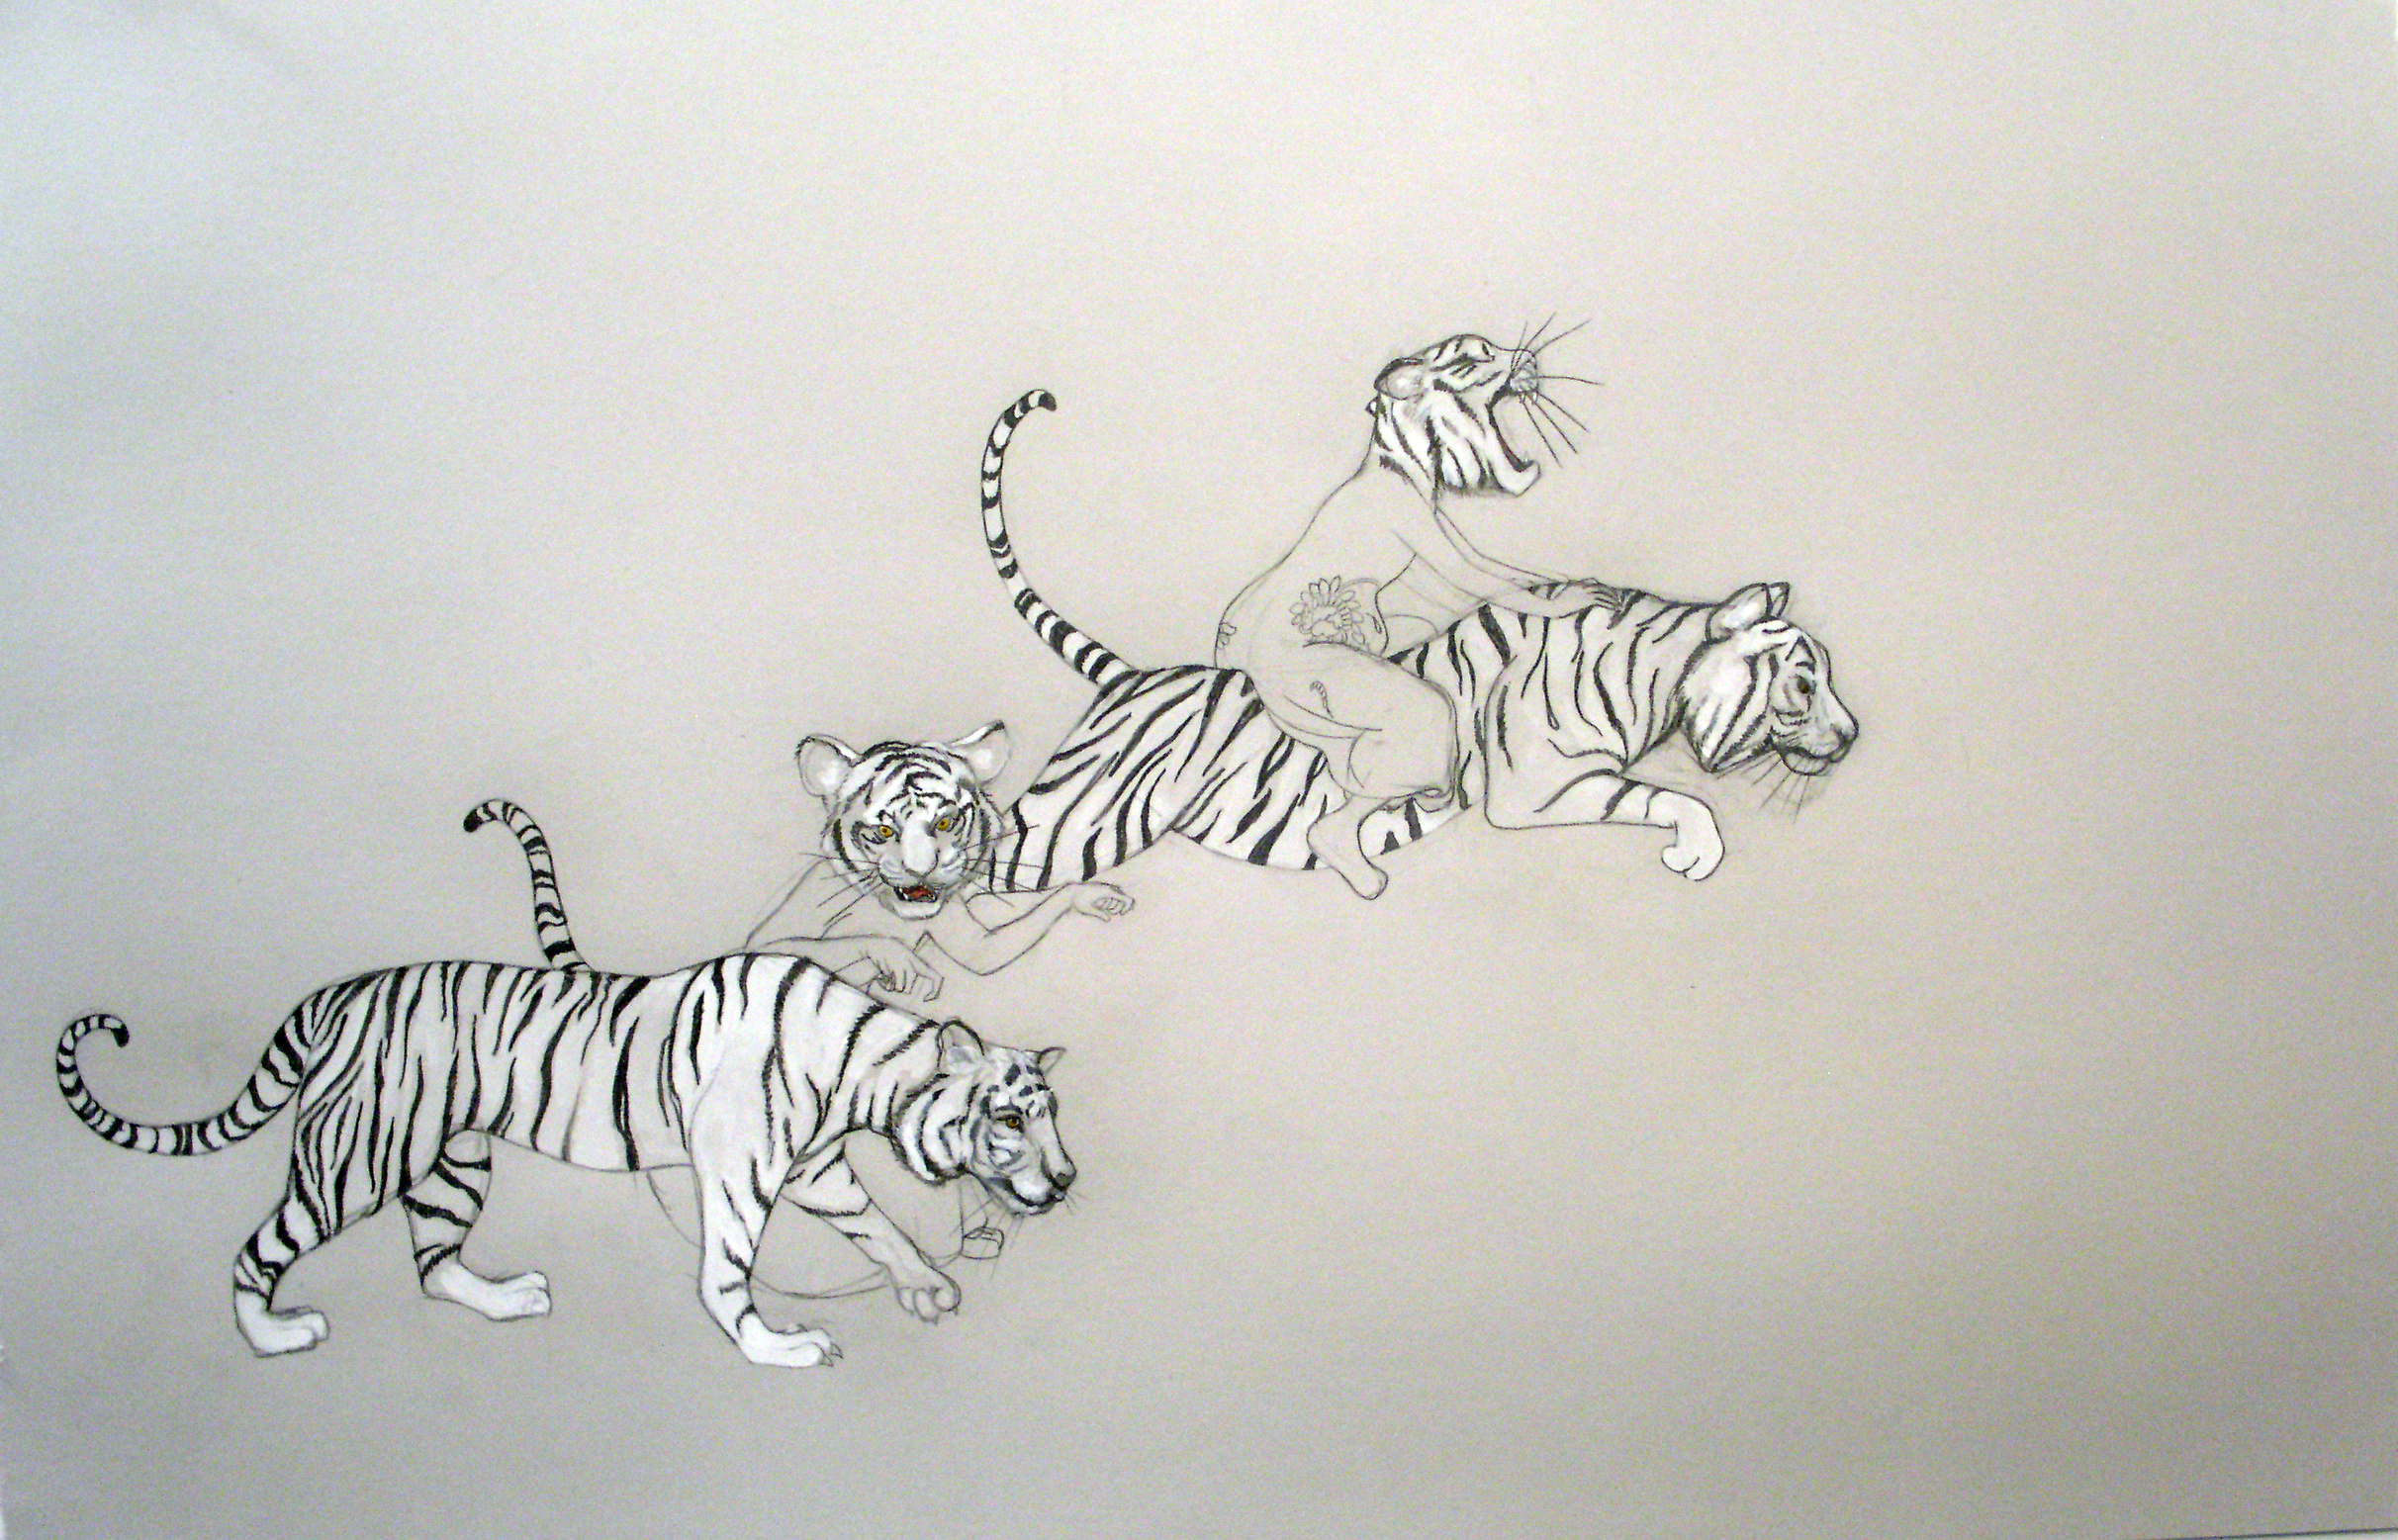   Tiger Girls II , 2006 Graphite, watercolor on gray paper 25 X 38 inches Private collection&nbsp;  